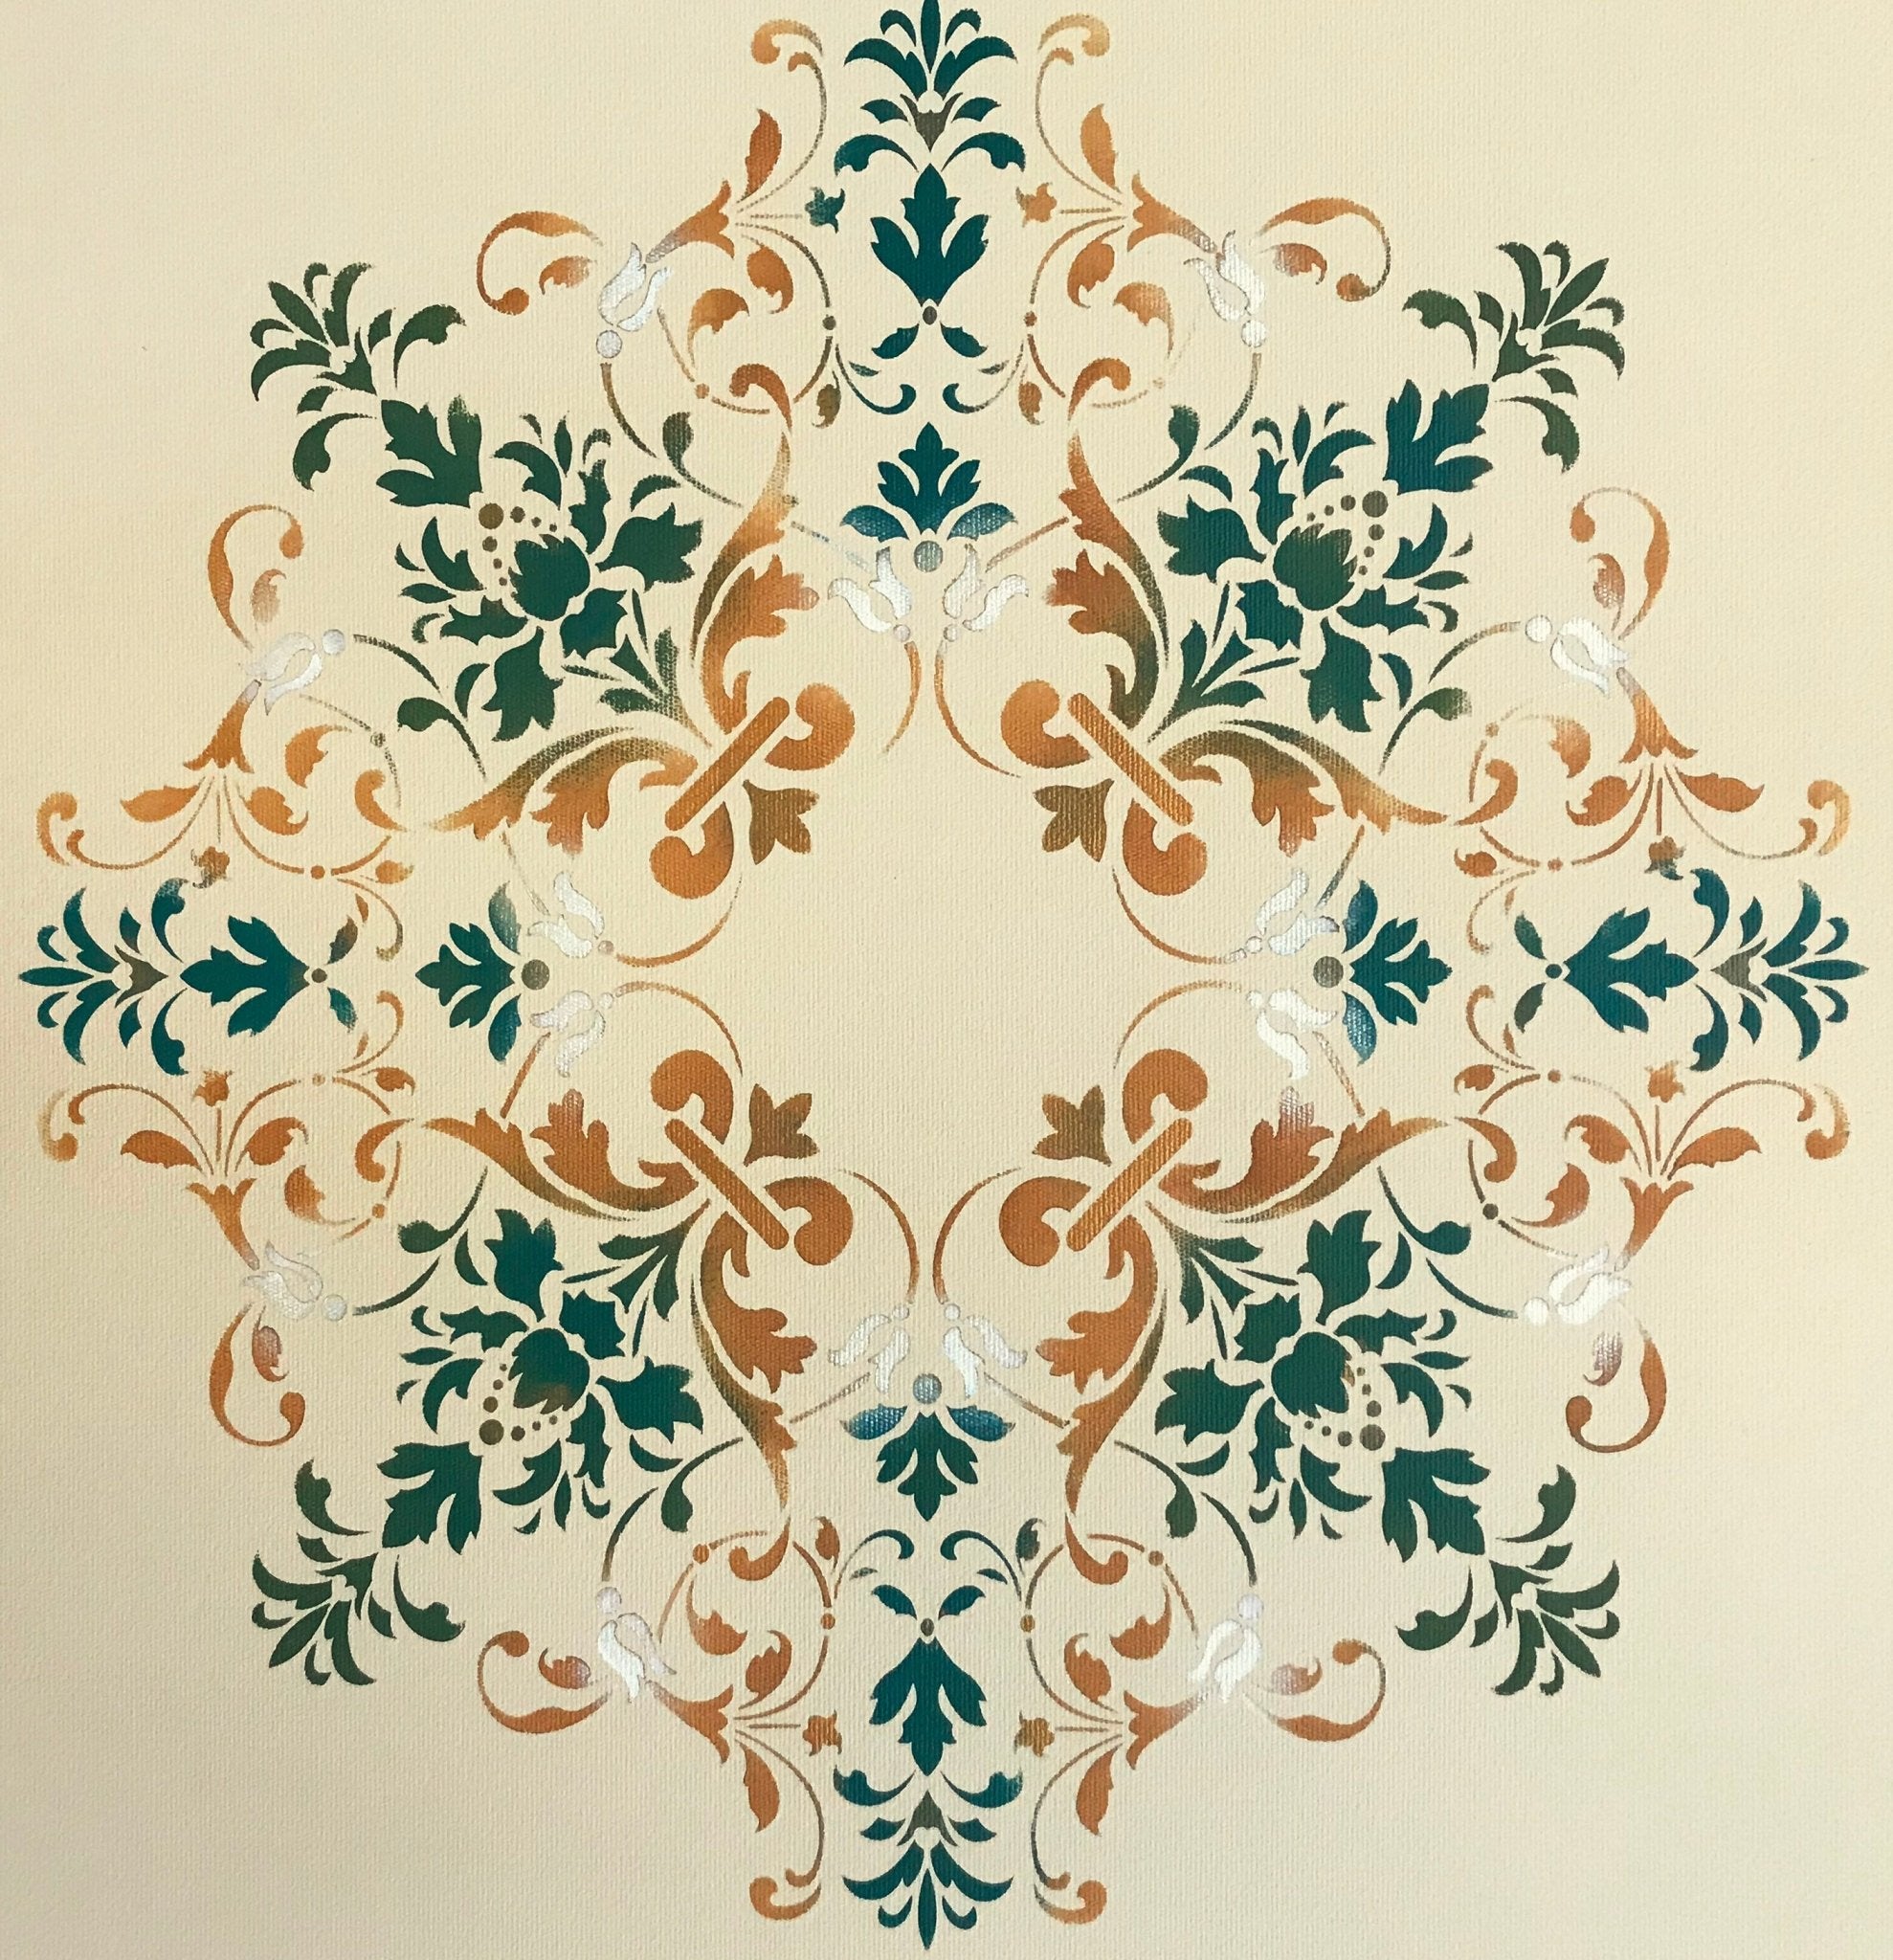 A close up of the center medallion on this floorcloth, the overall design being based on a victorian ceiling pattern.